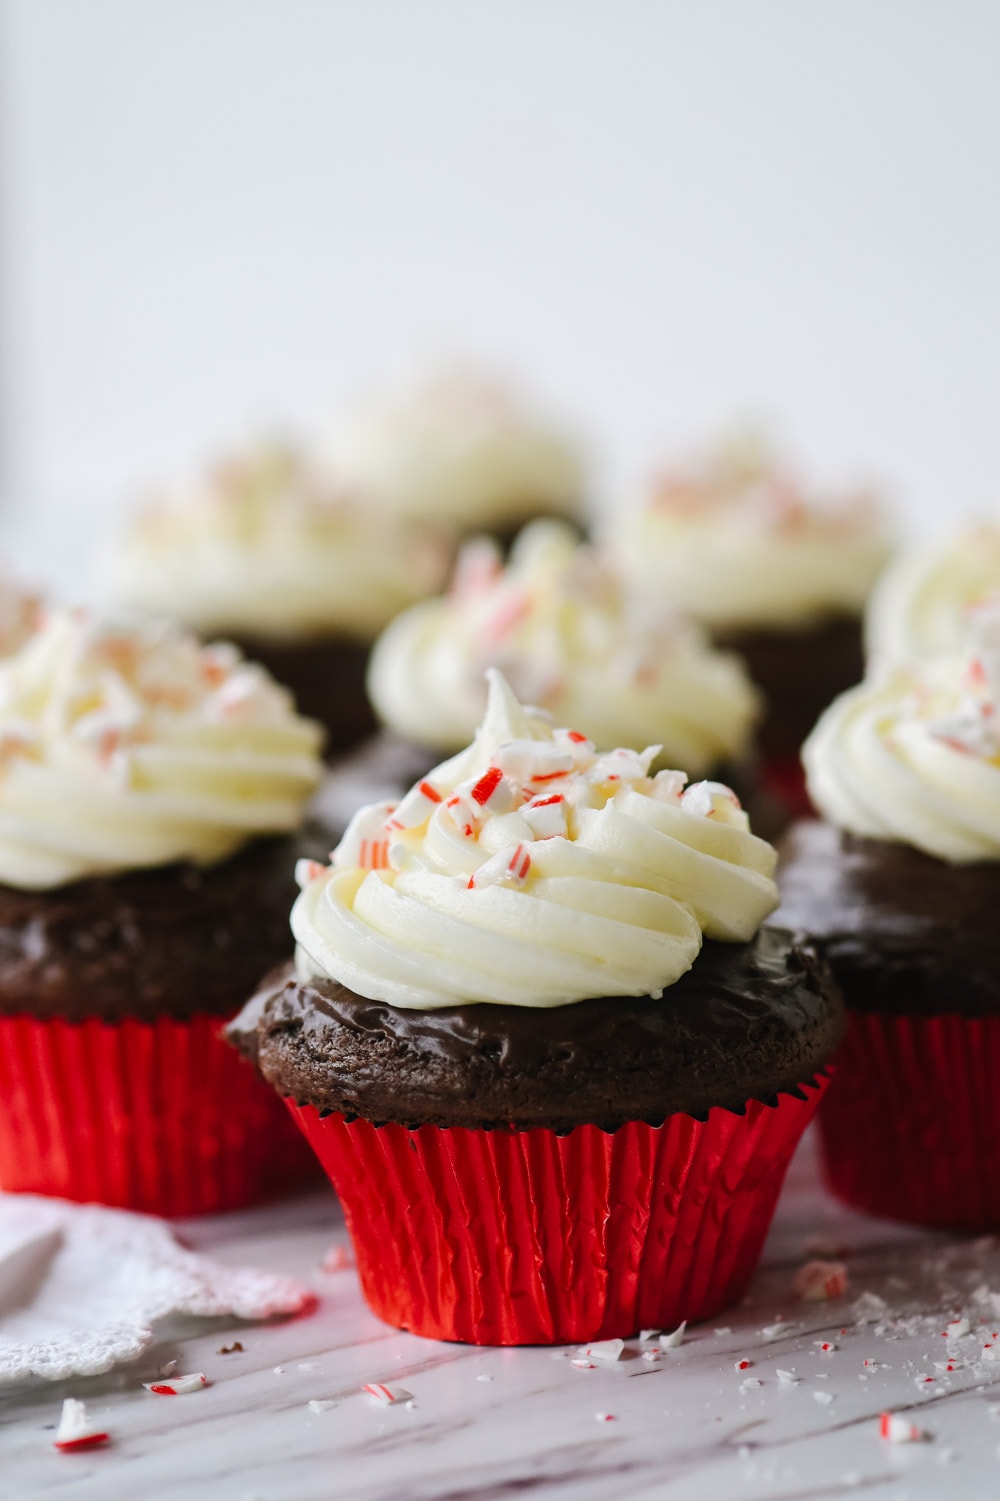 chocolate cupcake with cream cheese frosting